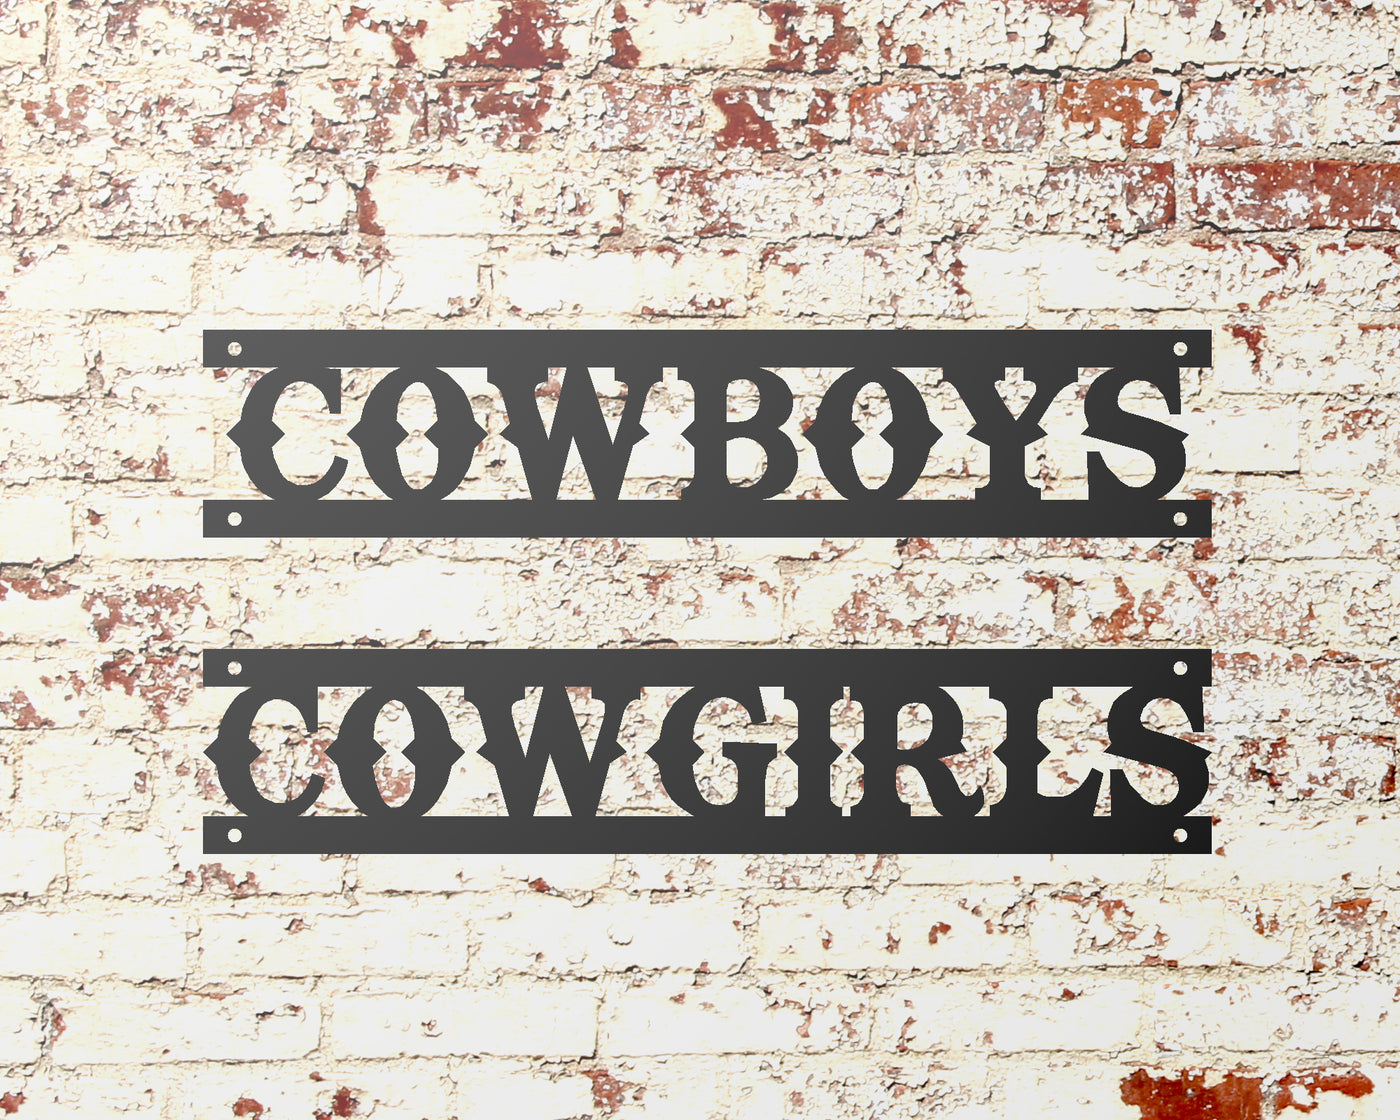 Cowboys and Cowgirls Metal Word Signs - Madison Iron and Wood - Metal Word Art - metal outdoor decor - Steel deocrations - american made products - veteran owned business products - fencing decorations - fencing supplies - custom wall decorations - personalized wall signs - steel - decorative post caps - steel post caps - metal post caps - brackets - structural brackets - home improvement - easter - easter decorations - easter gift - easter yard decor